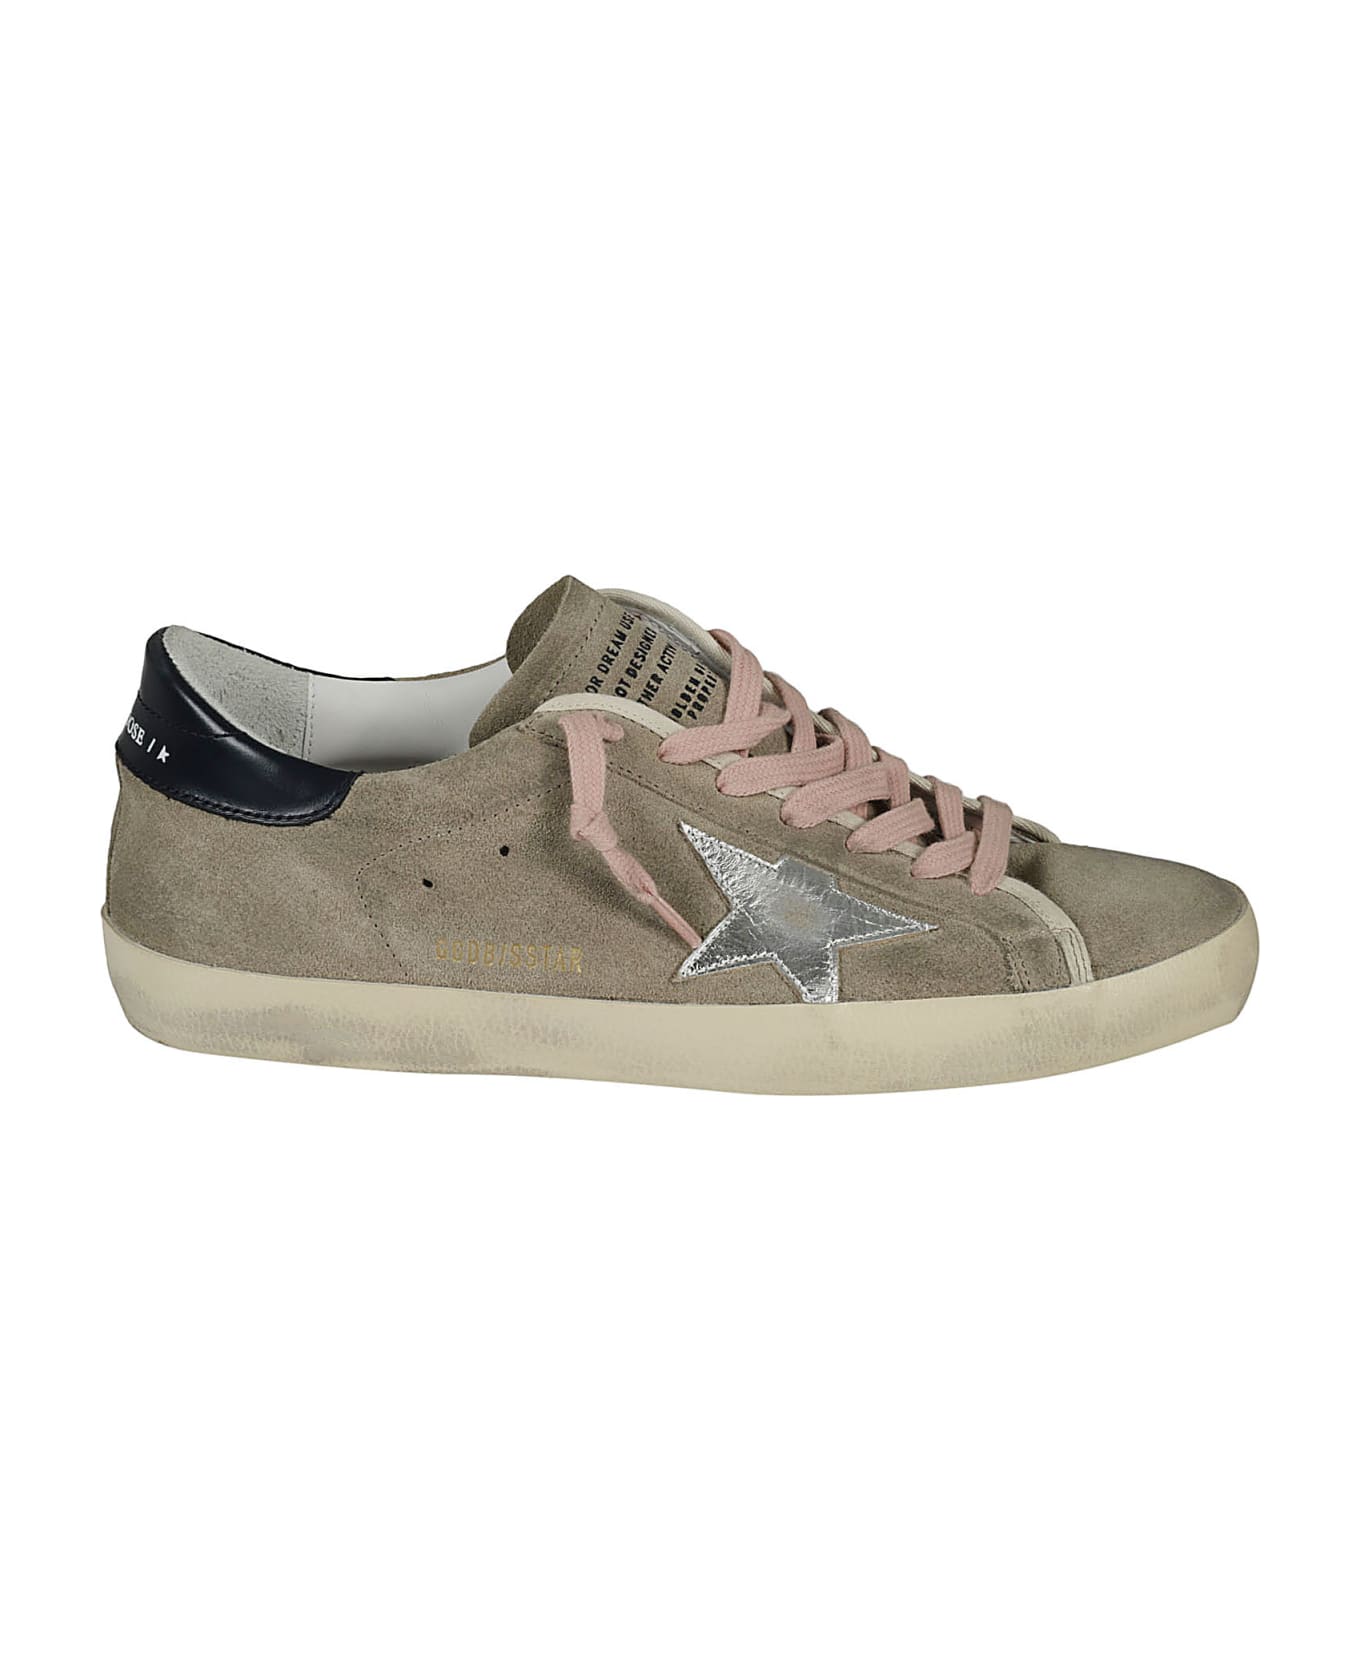 Golden Goose Silver-star Classic Sneakers - Taupe/Silver